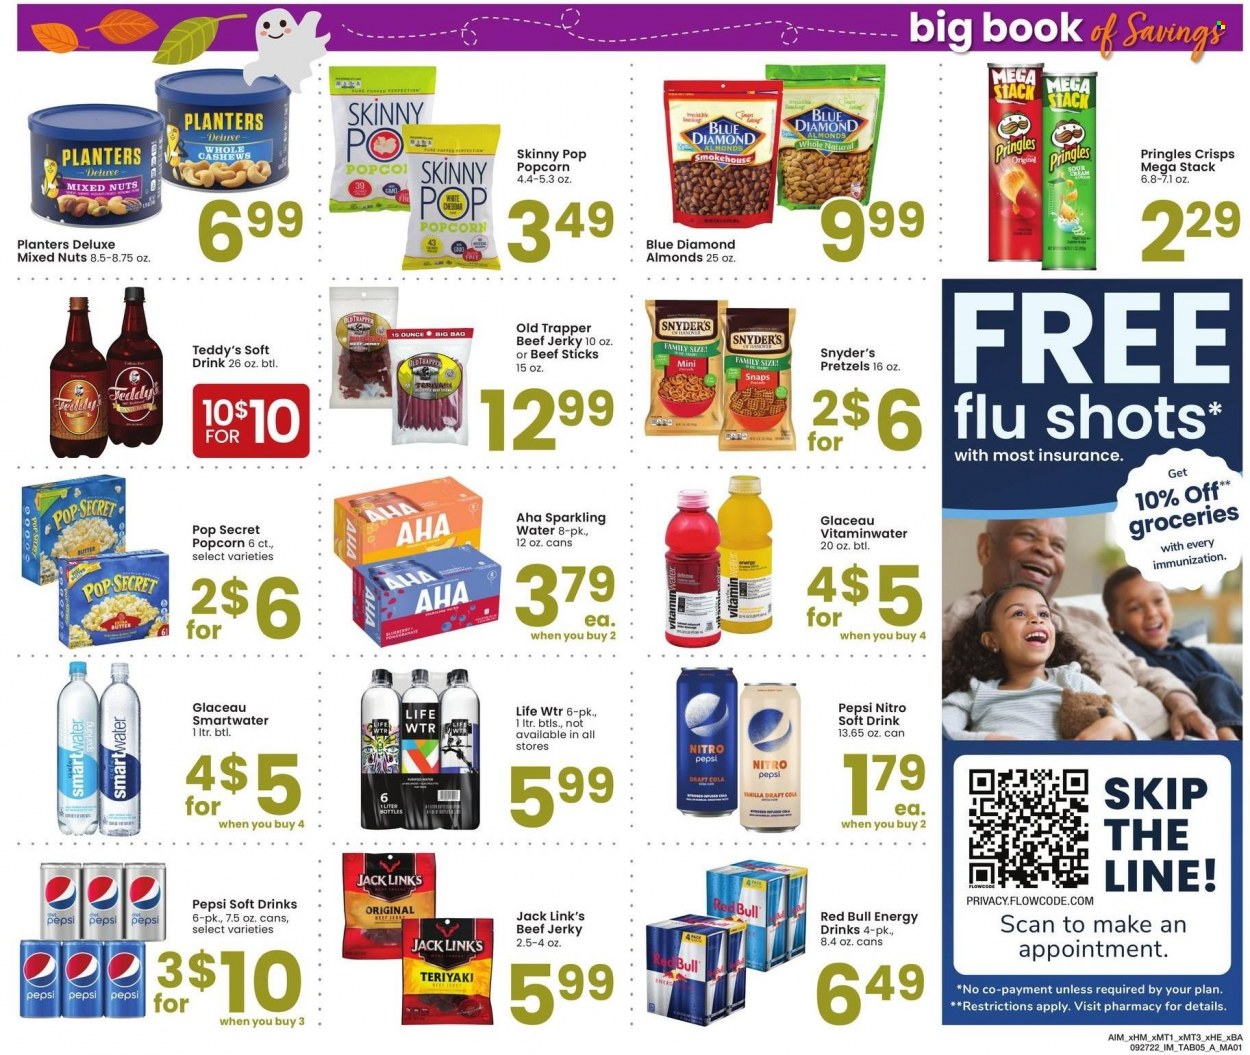 thumbnail - Albertsons Flyer - 09/27/2022 - 10/31/2022 - Sales products - pretzels, beef jerky, jerky, beef sticks, cheddar, cheese, butter, sour cream, Pringles, popcorn, Skinny Pop, Jack Link's, almonds, cashews, mixed nuts, Planters, Blue Diamond, Pepsi, energy drink, soft drink, Red Bull, sparkling water, Smartwater, bag, teddy. Page 5.